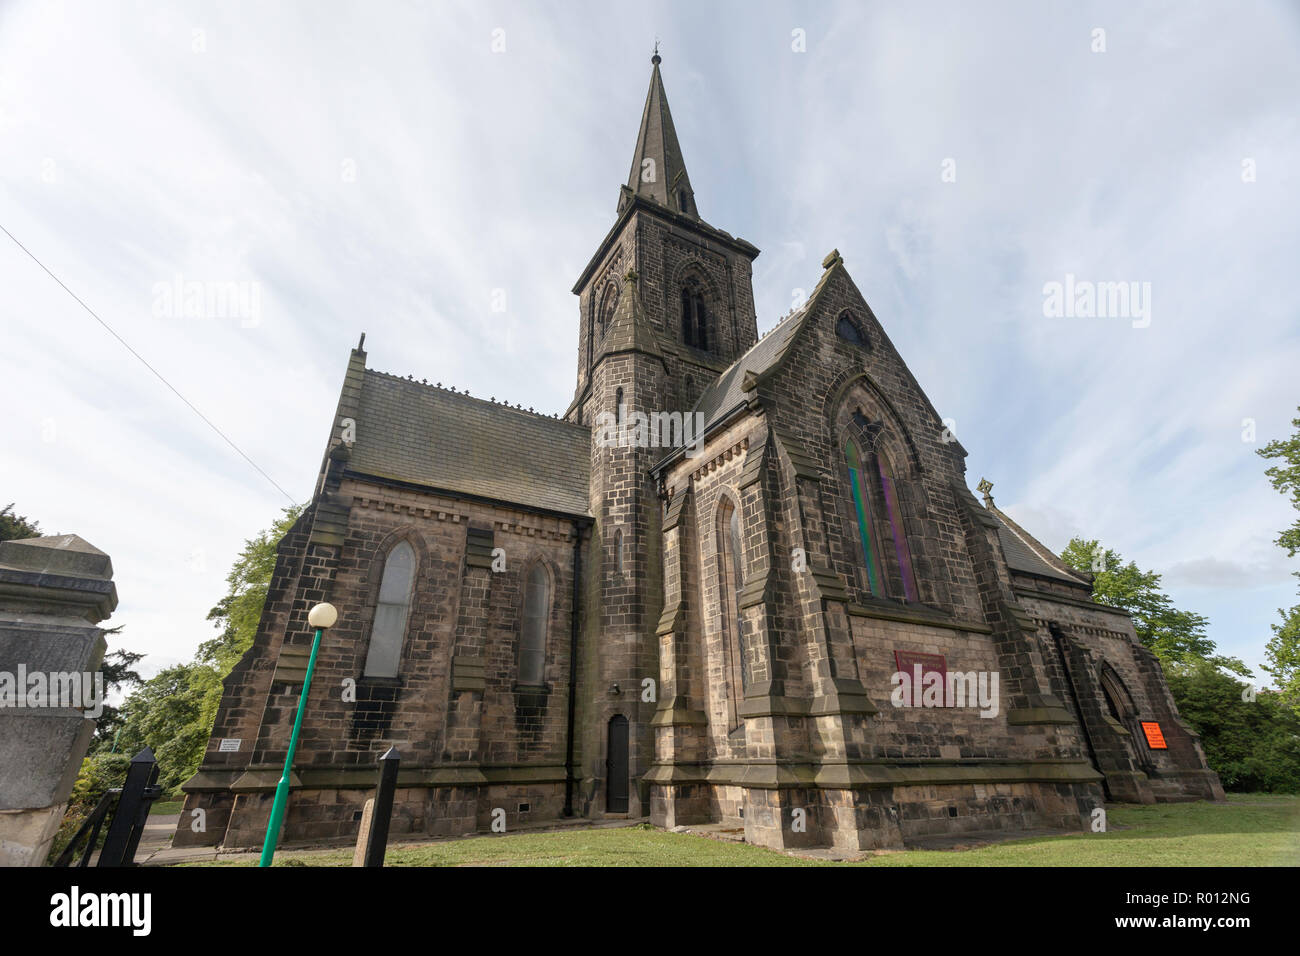 External view of St. Mary's, the Anglican parish churc at Garforth, near Leeds in West Yorkshire Stock Photo